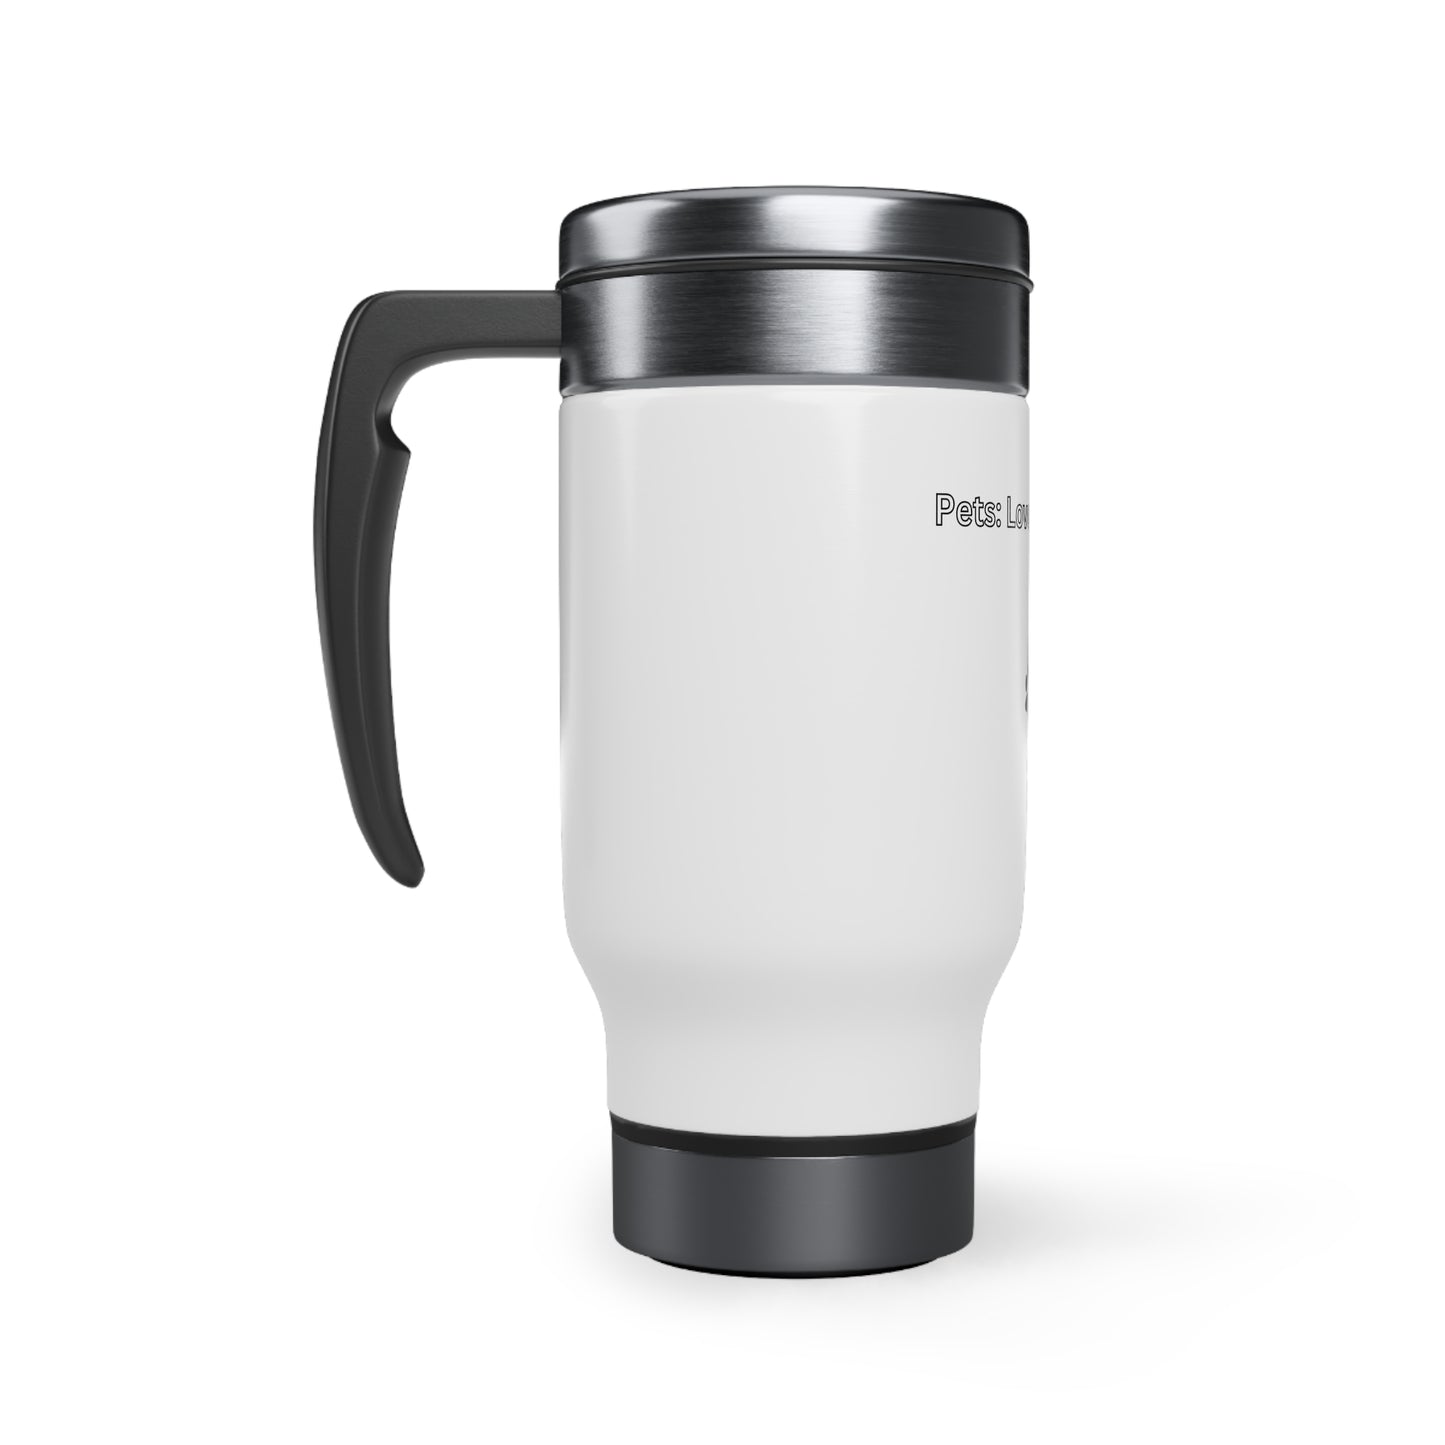 Love at First Woof Stainless Steel Travel Mug with Handle, 14oz